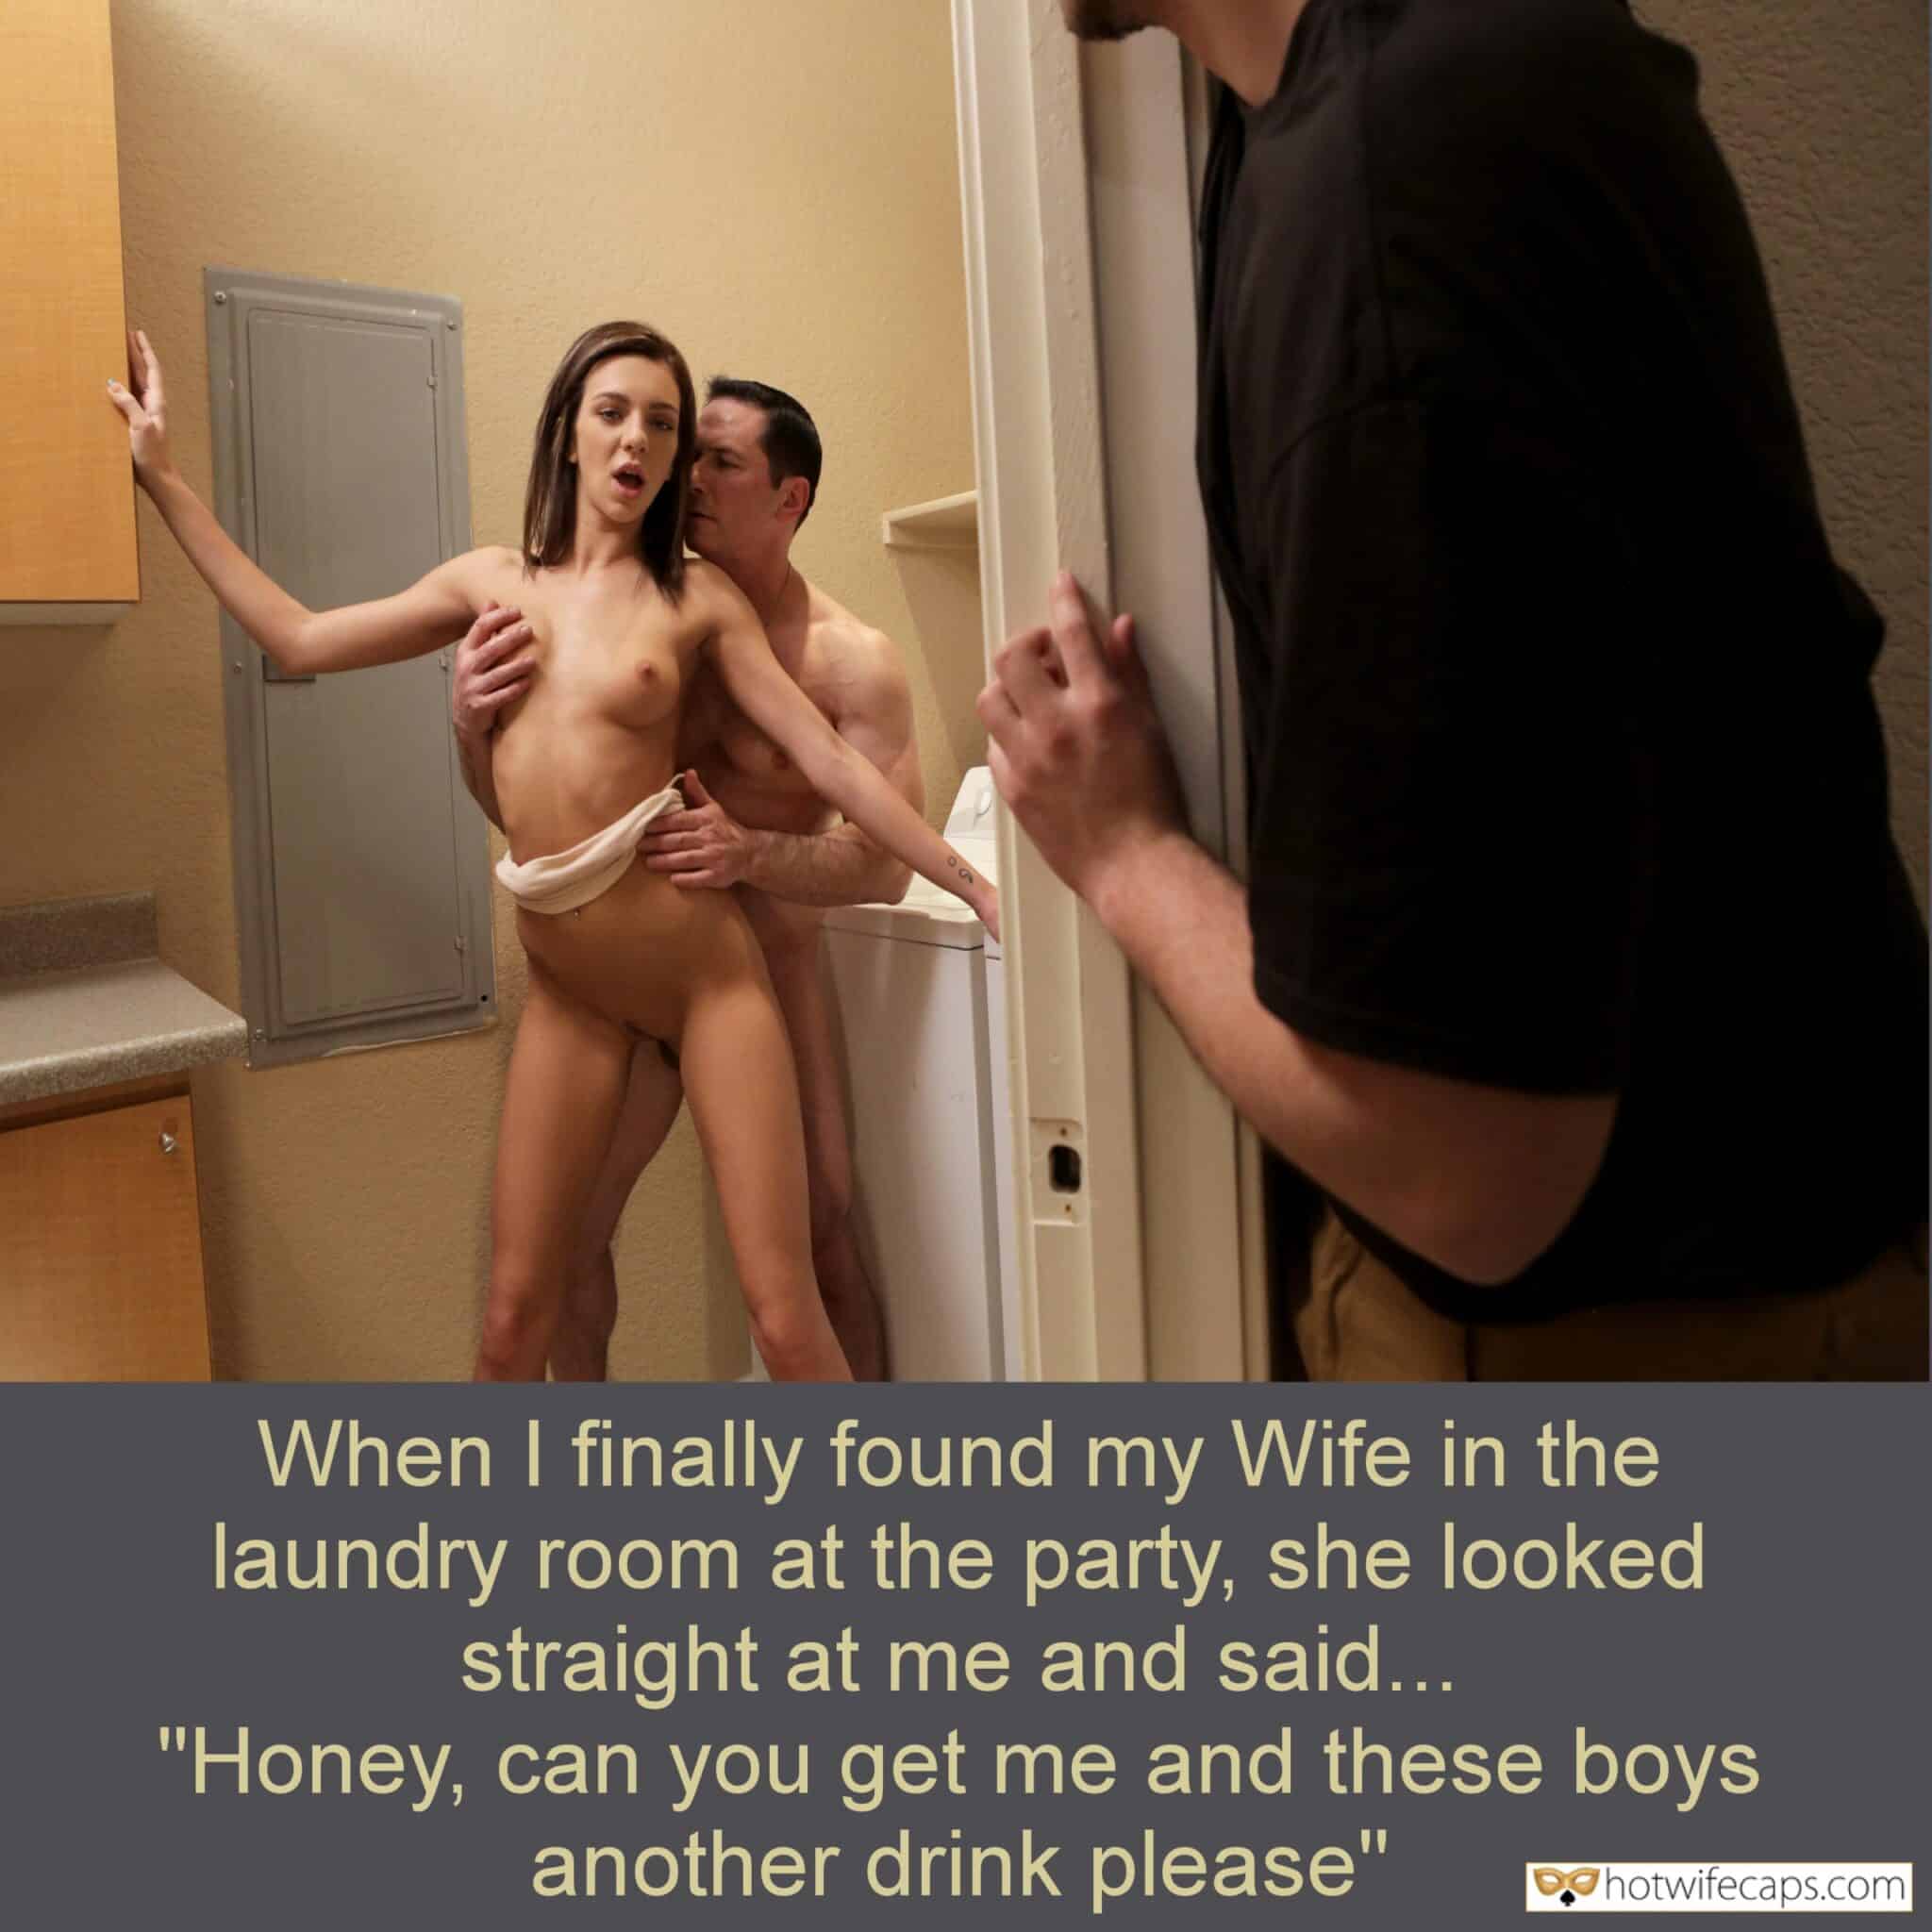 Cheating, Femdom, Humiliation, Public Hotwife Caption №14254 when i caught her fucking bitch refused to stop picture pic